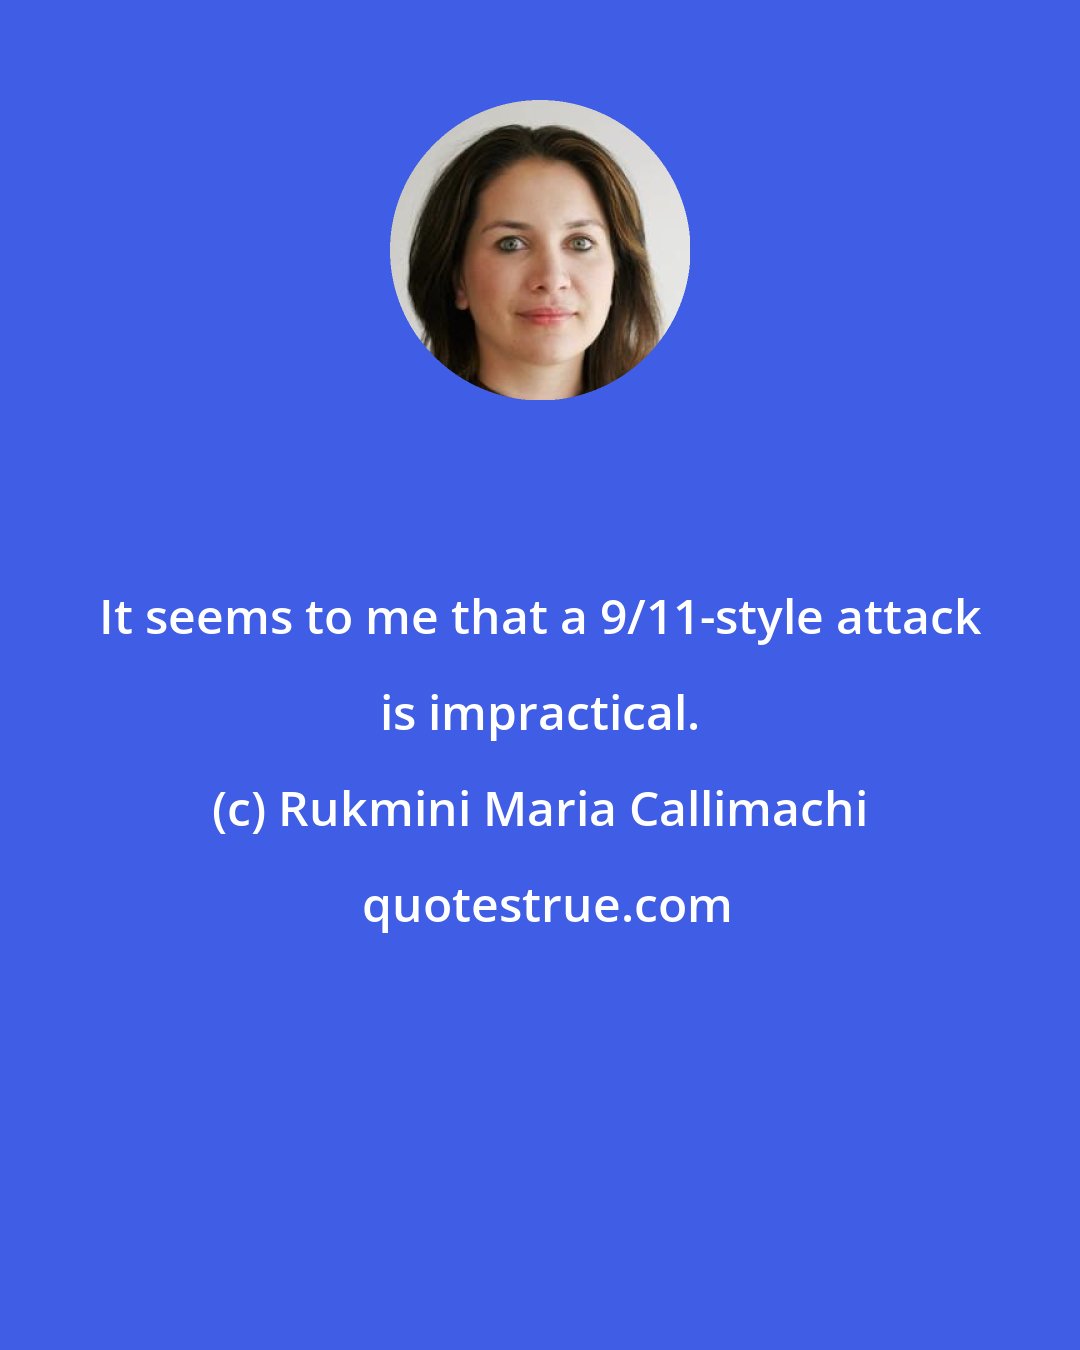 Rukmini Maria Callimachi: It seems to me that a 9/11-style attack is impractical.